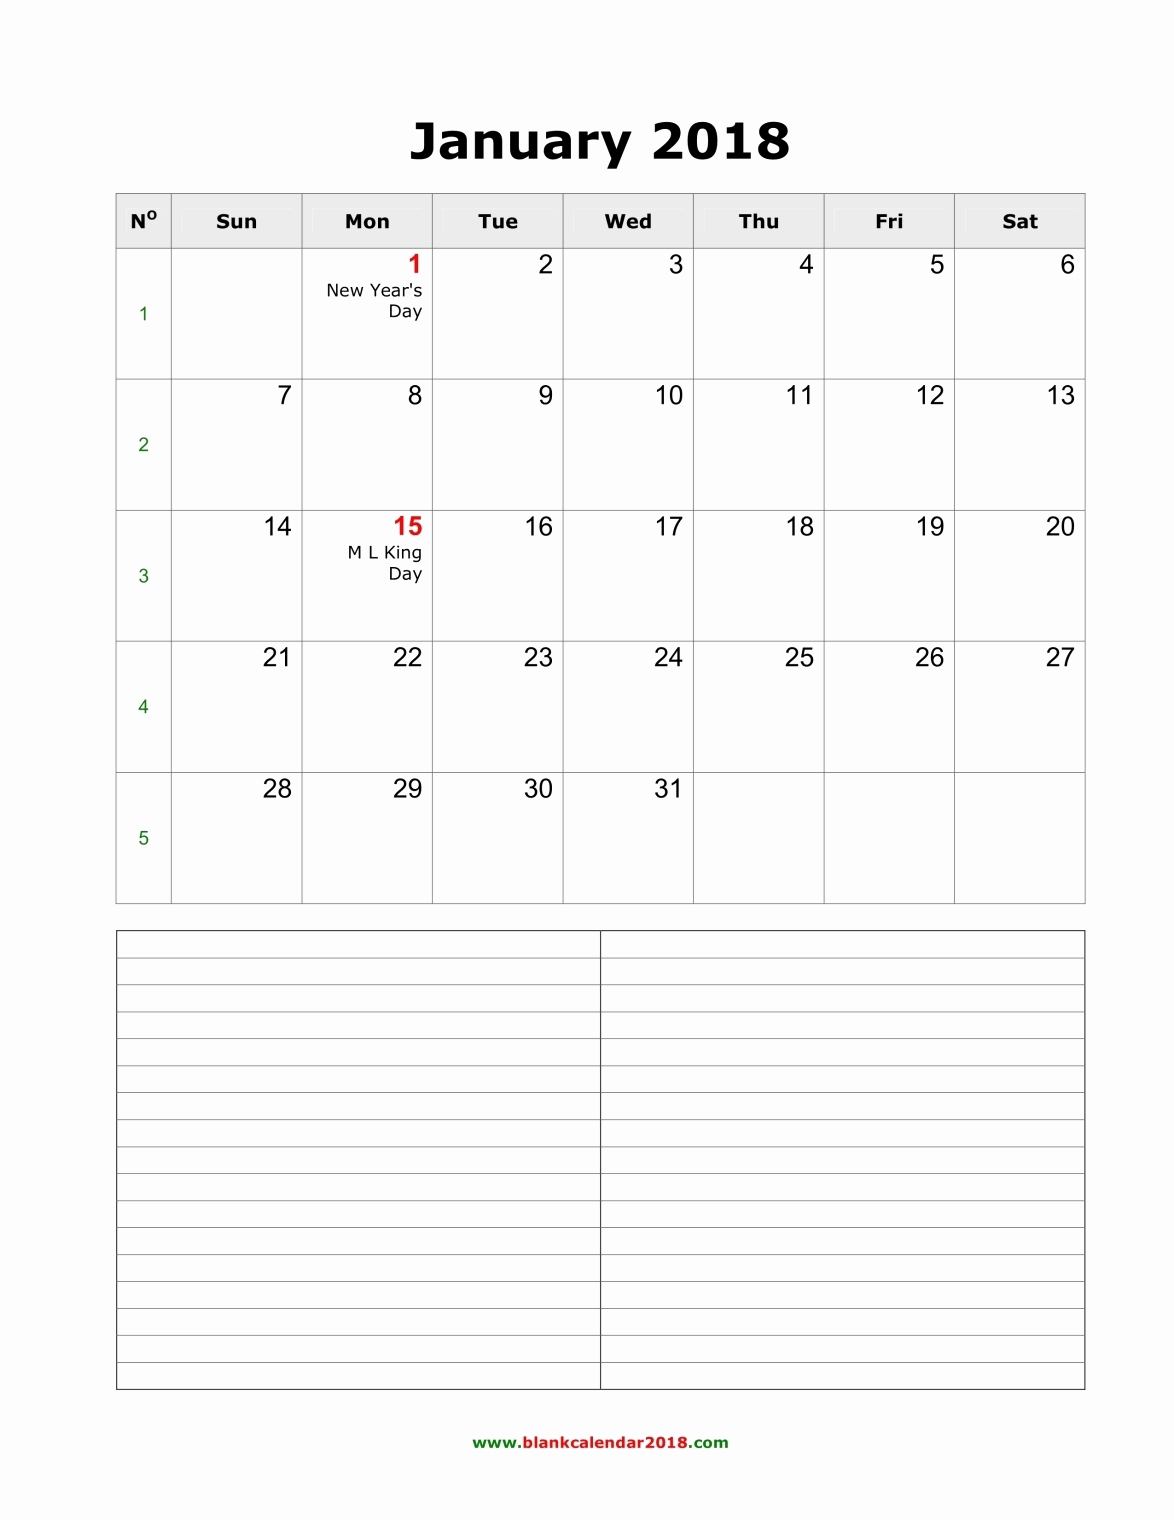 Blank Monthly Calendar Pdf Fresh Blank Monthly Calendar 2018 with Notes Portrait